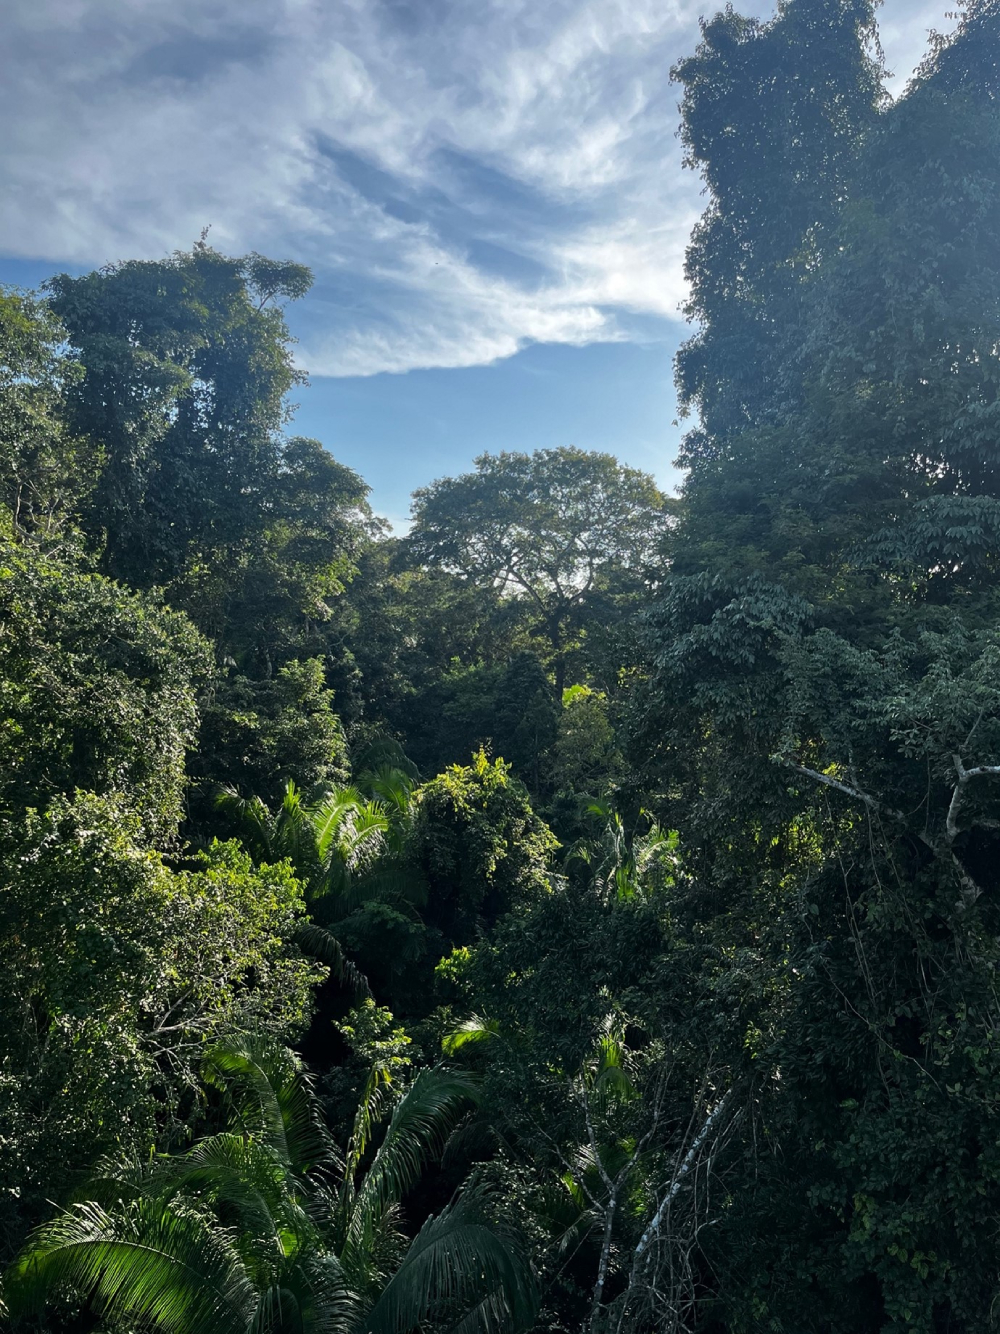 View from the Hoja Nueva research station